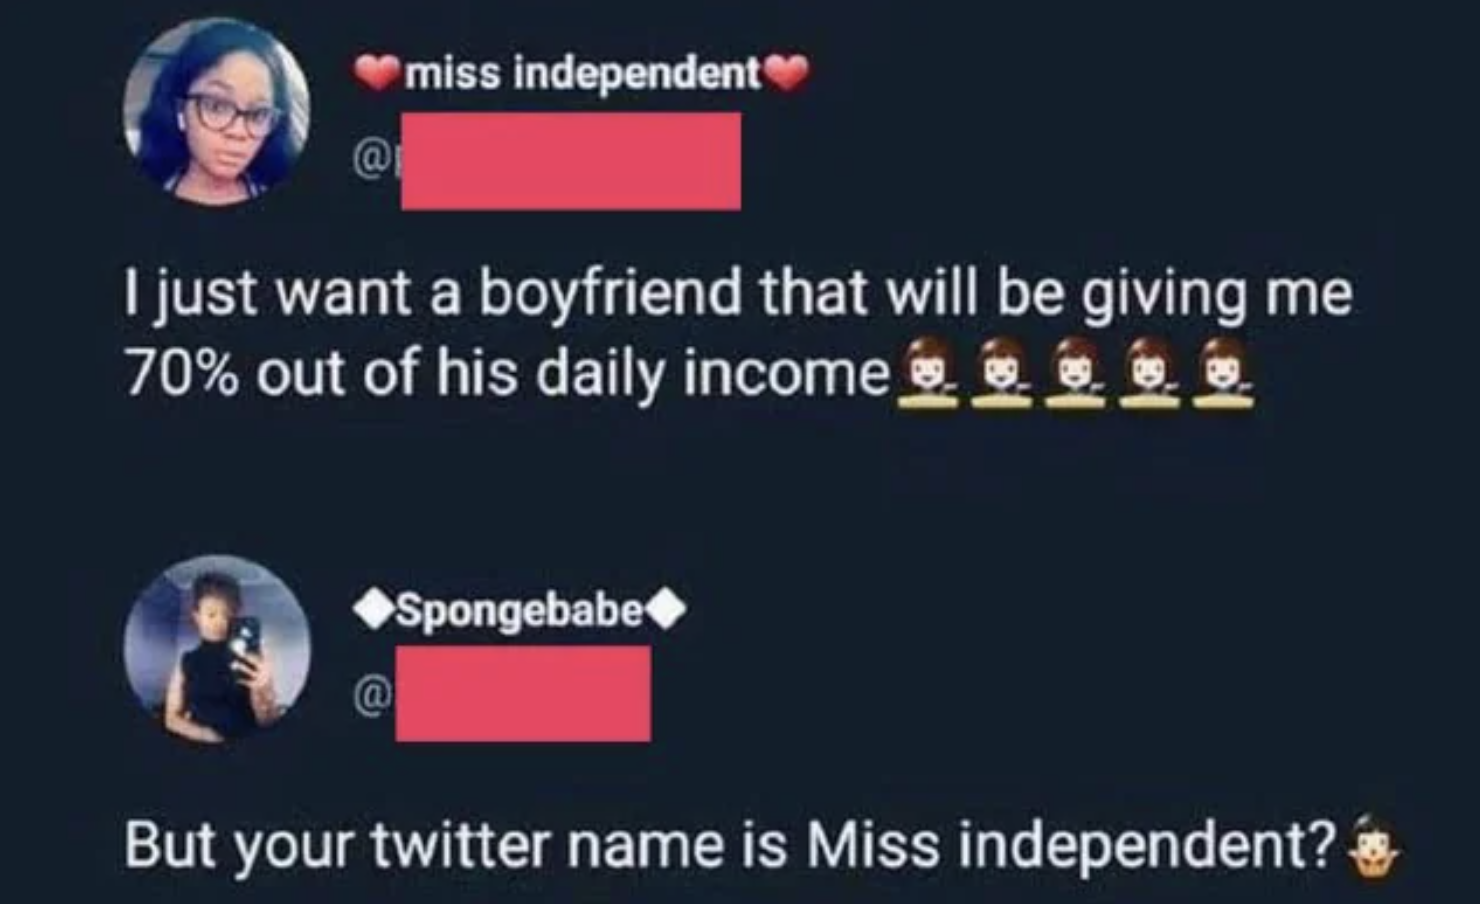 miss independent meme - miss independent I just want a boyfriend that will be giving me 70% out of his daily income w